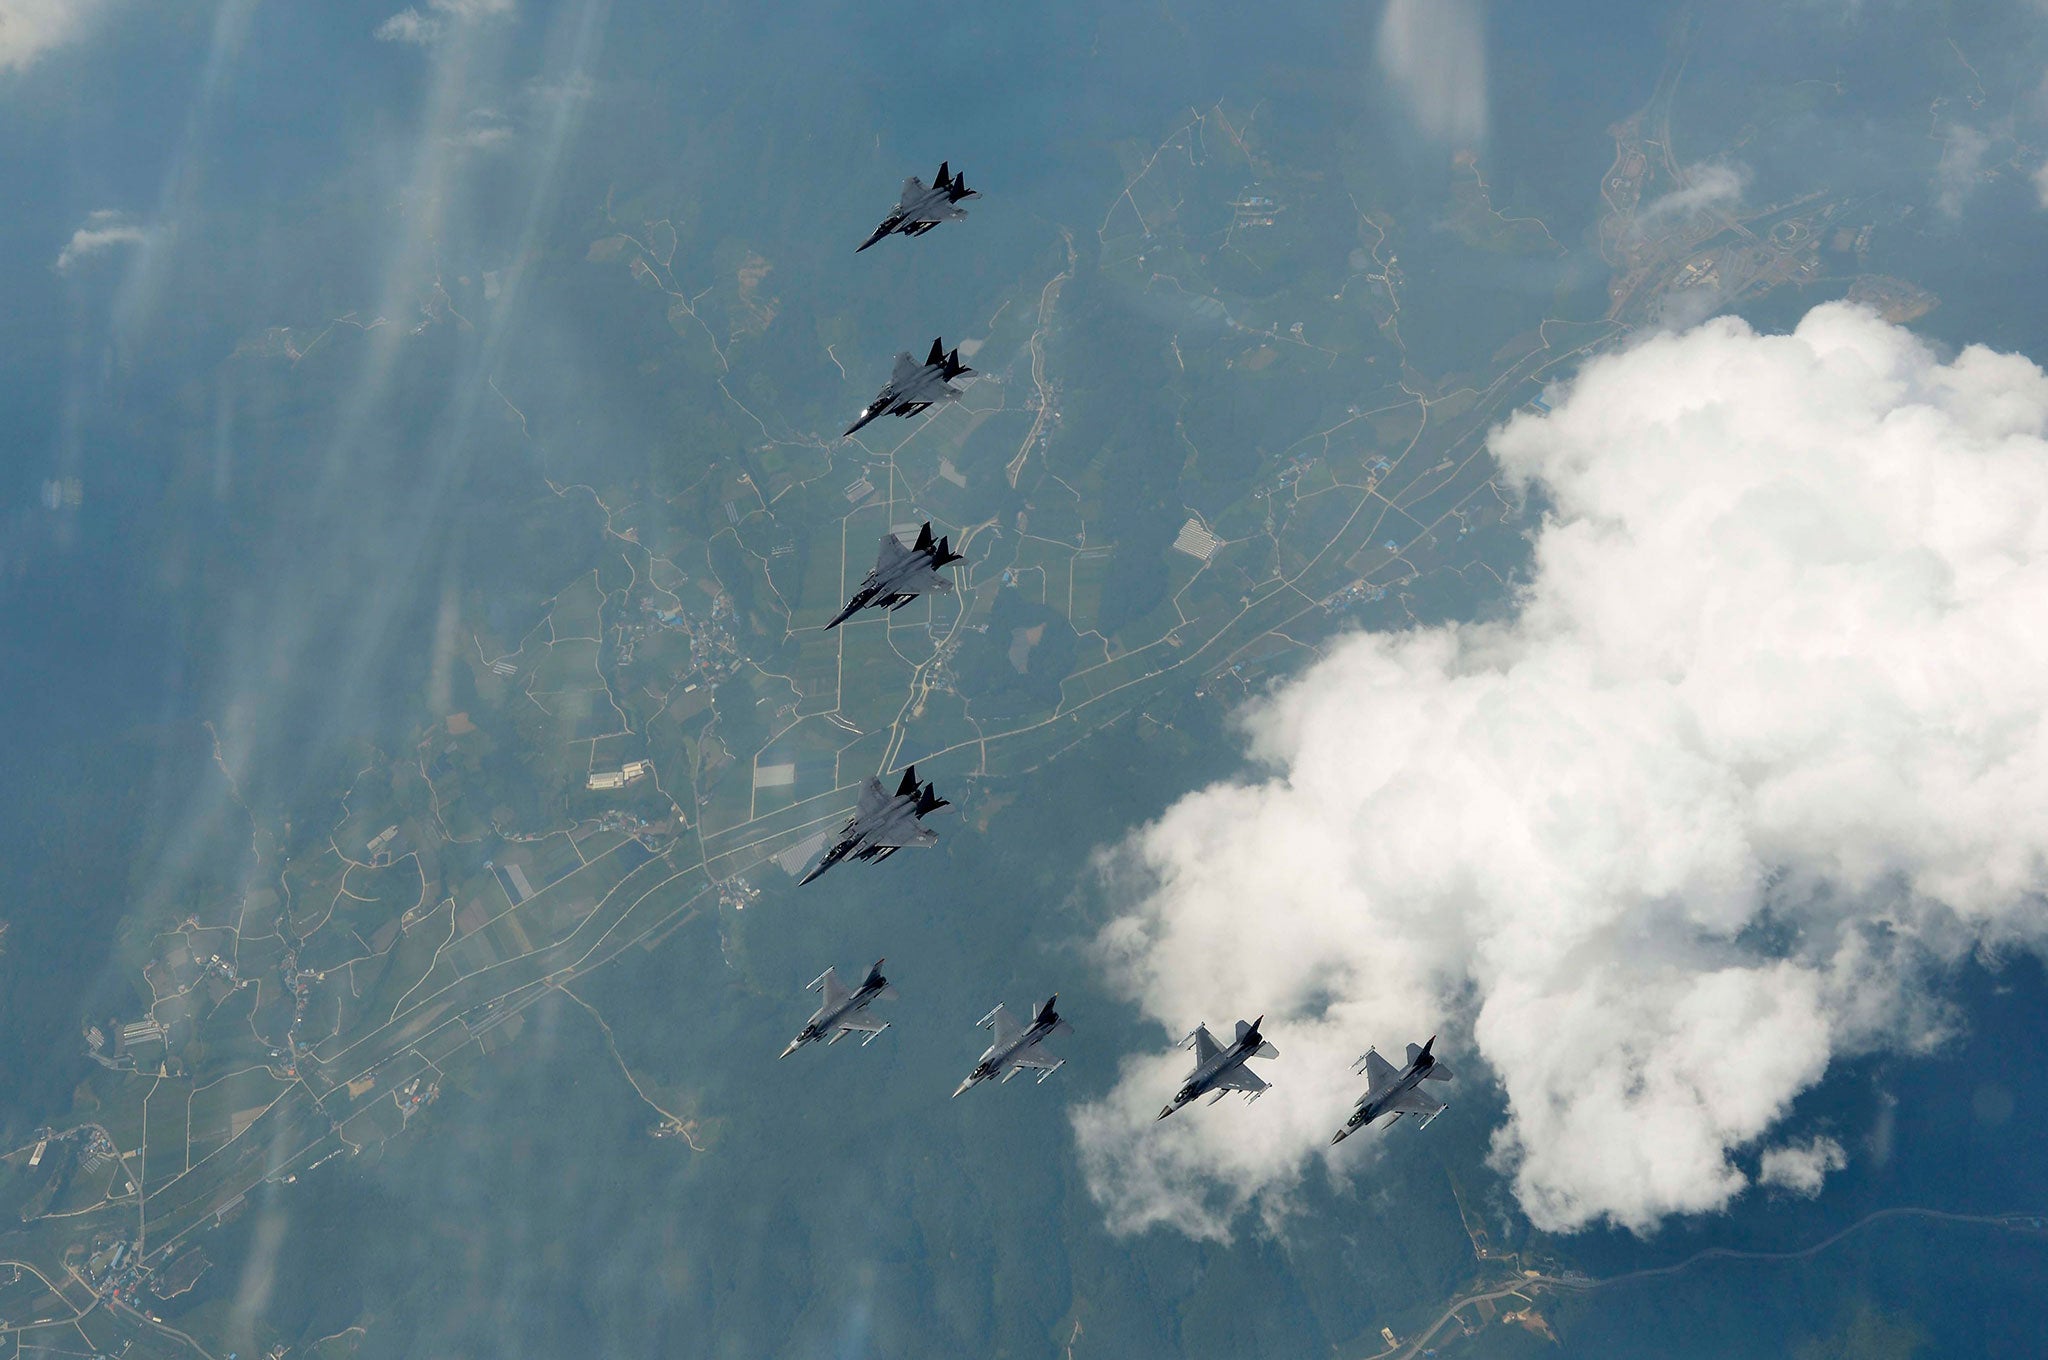 South Korean and US fighter jets flying over South Korea in a show of force against North Korean threats of provocation